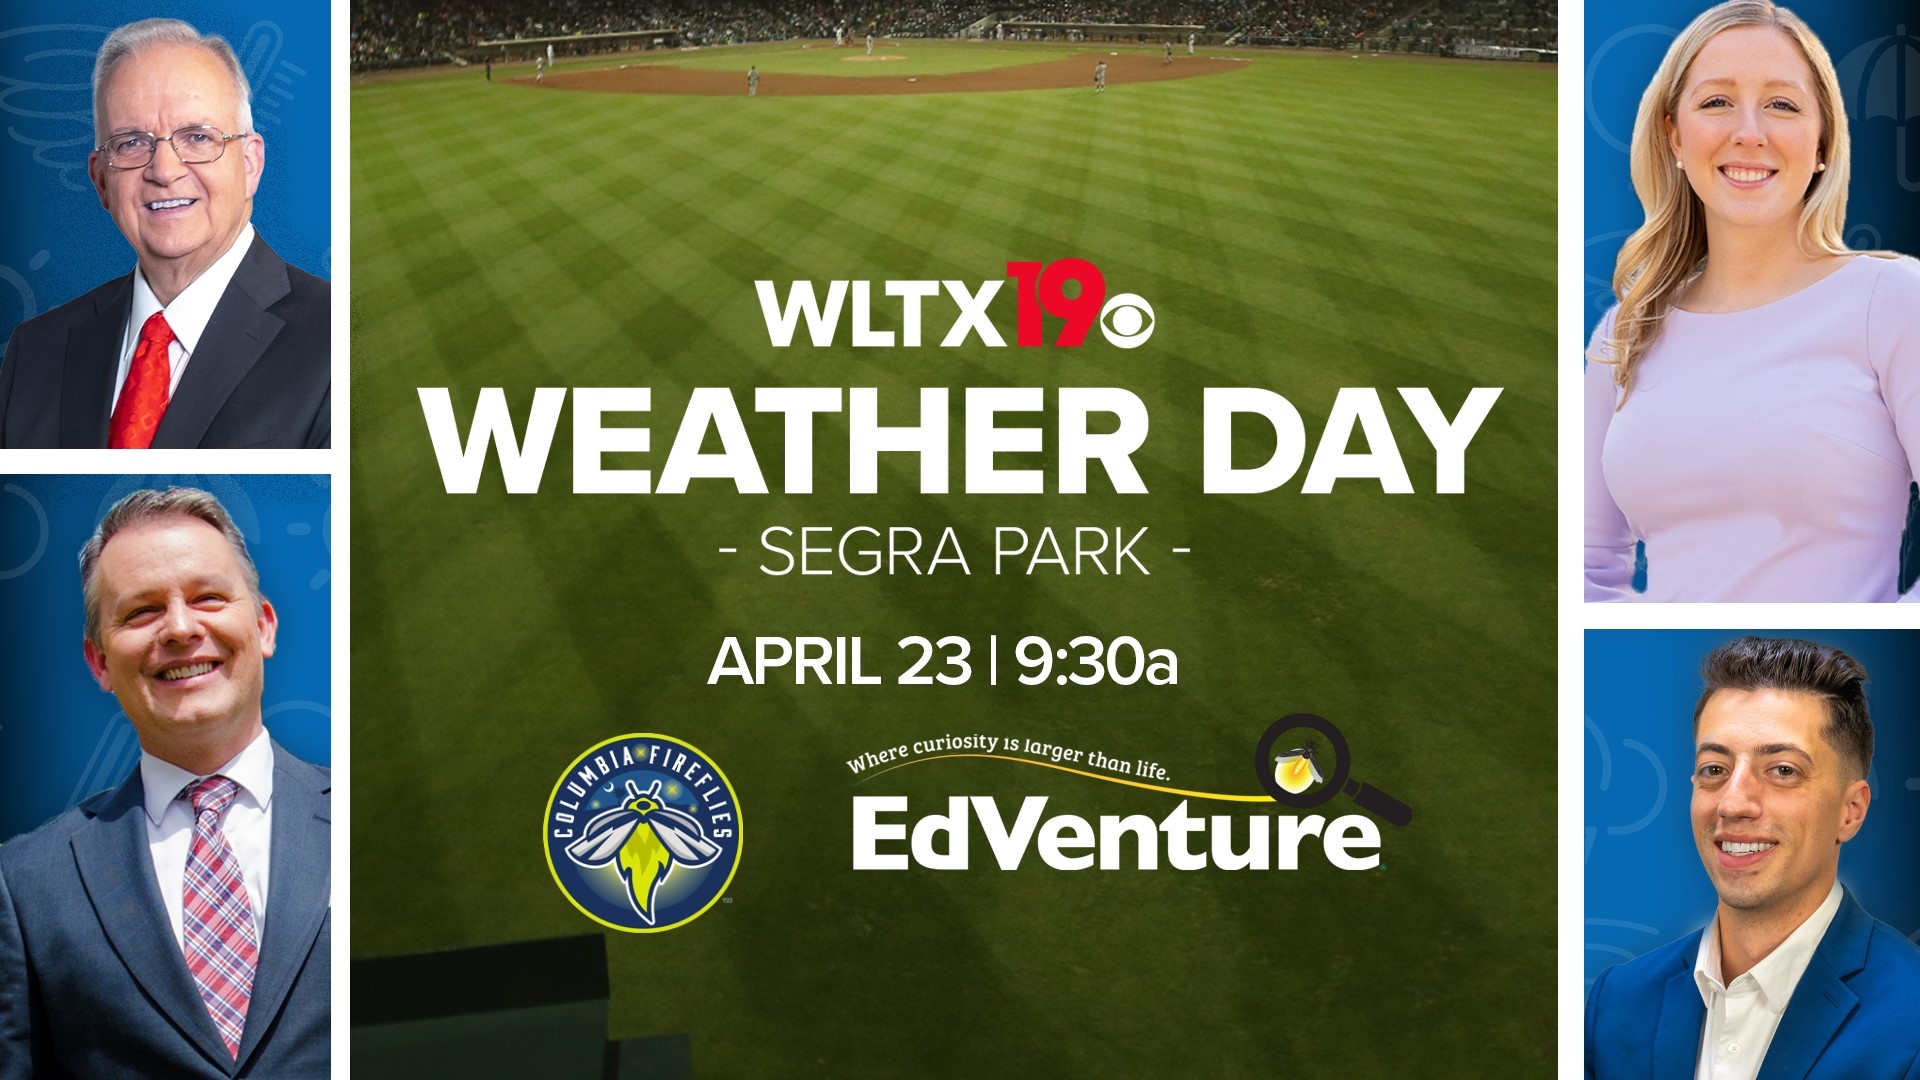 WLTX and EdVenture Children’s Museum partner for the 2nd Annual Weather Day at Segra Park on Tuesday, April 23